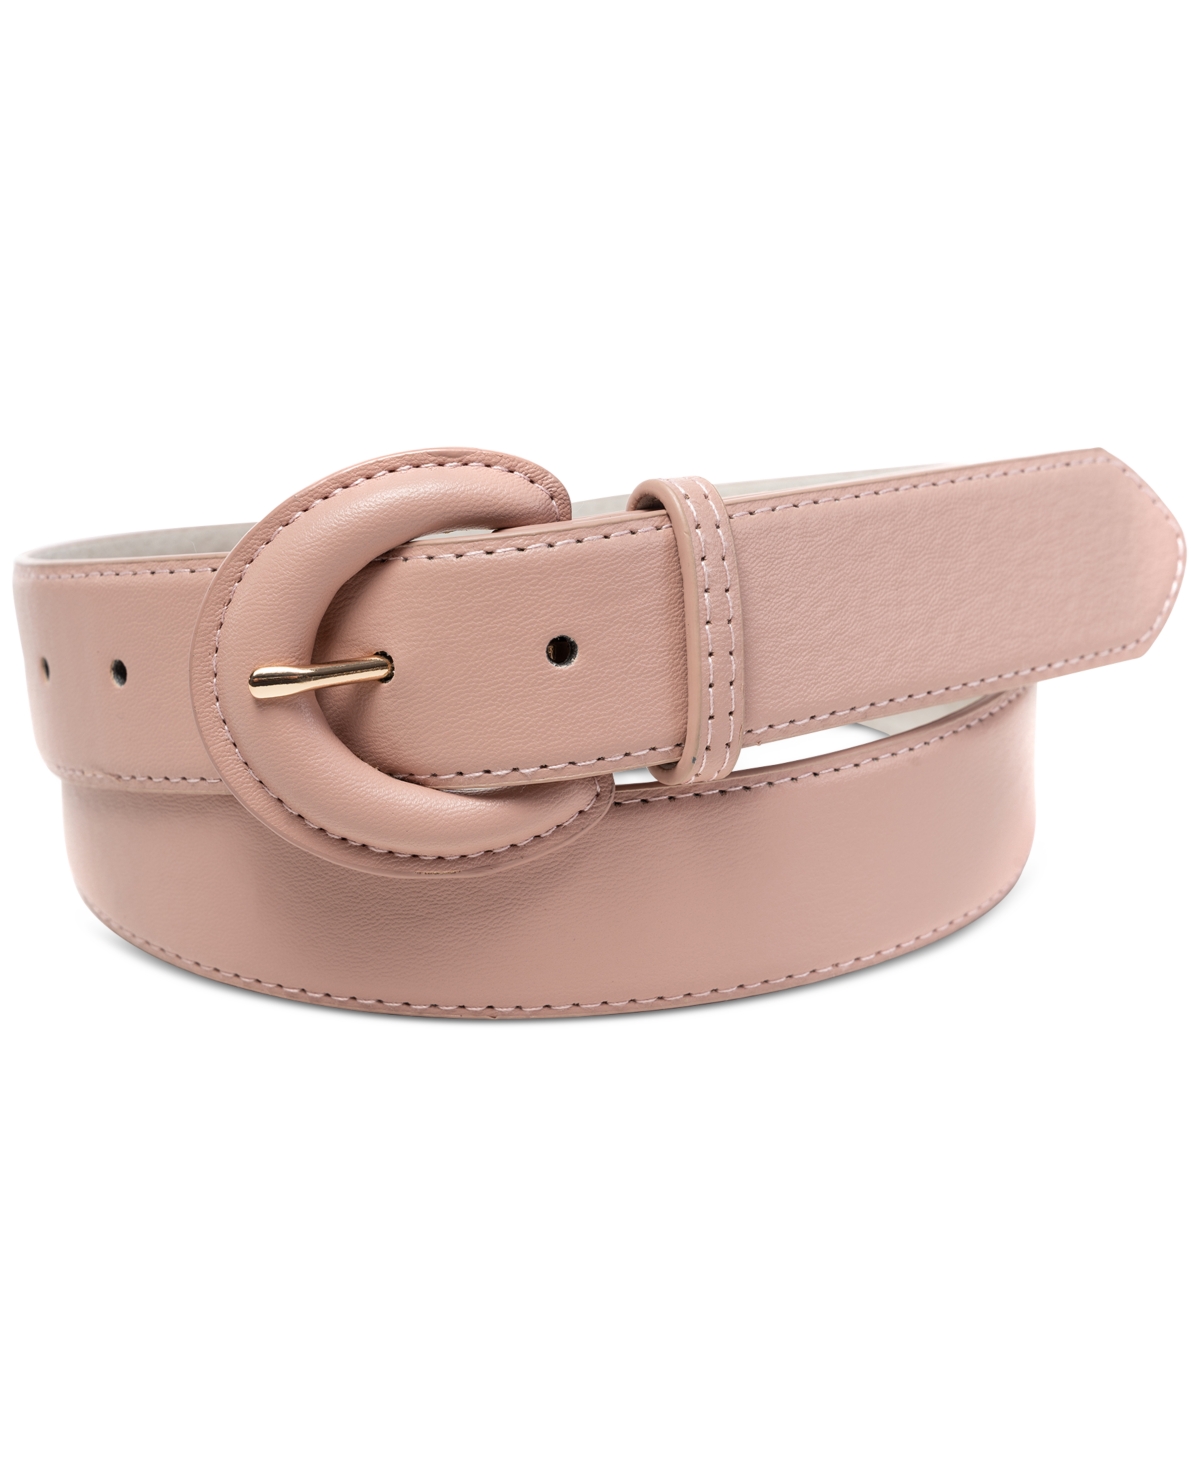 Women's Covered-Buckle Faux-Leather Belt, Created for Macy's - White